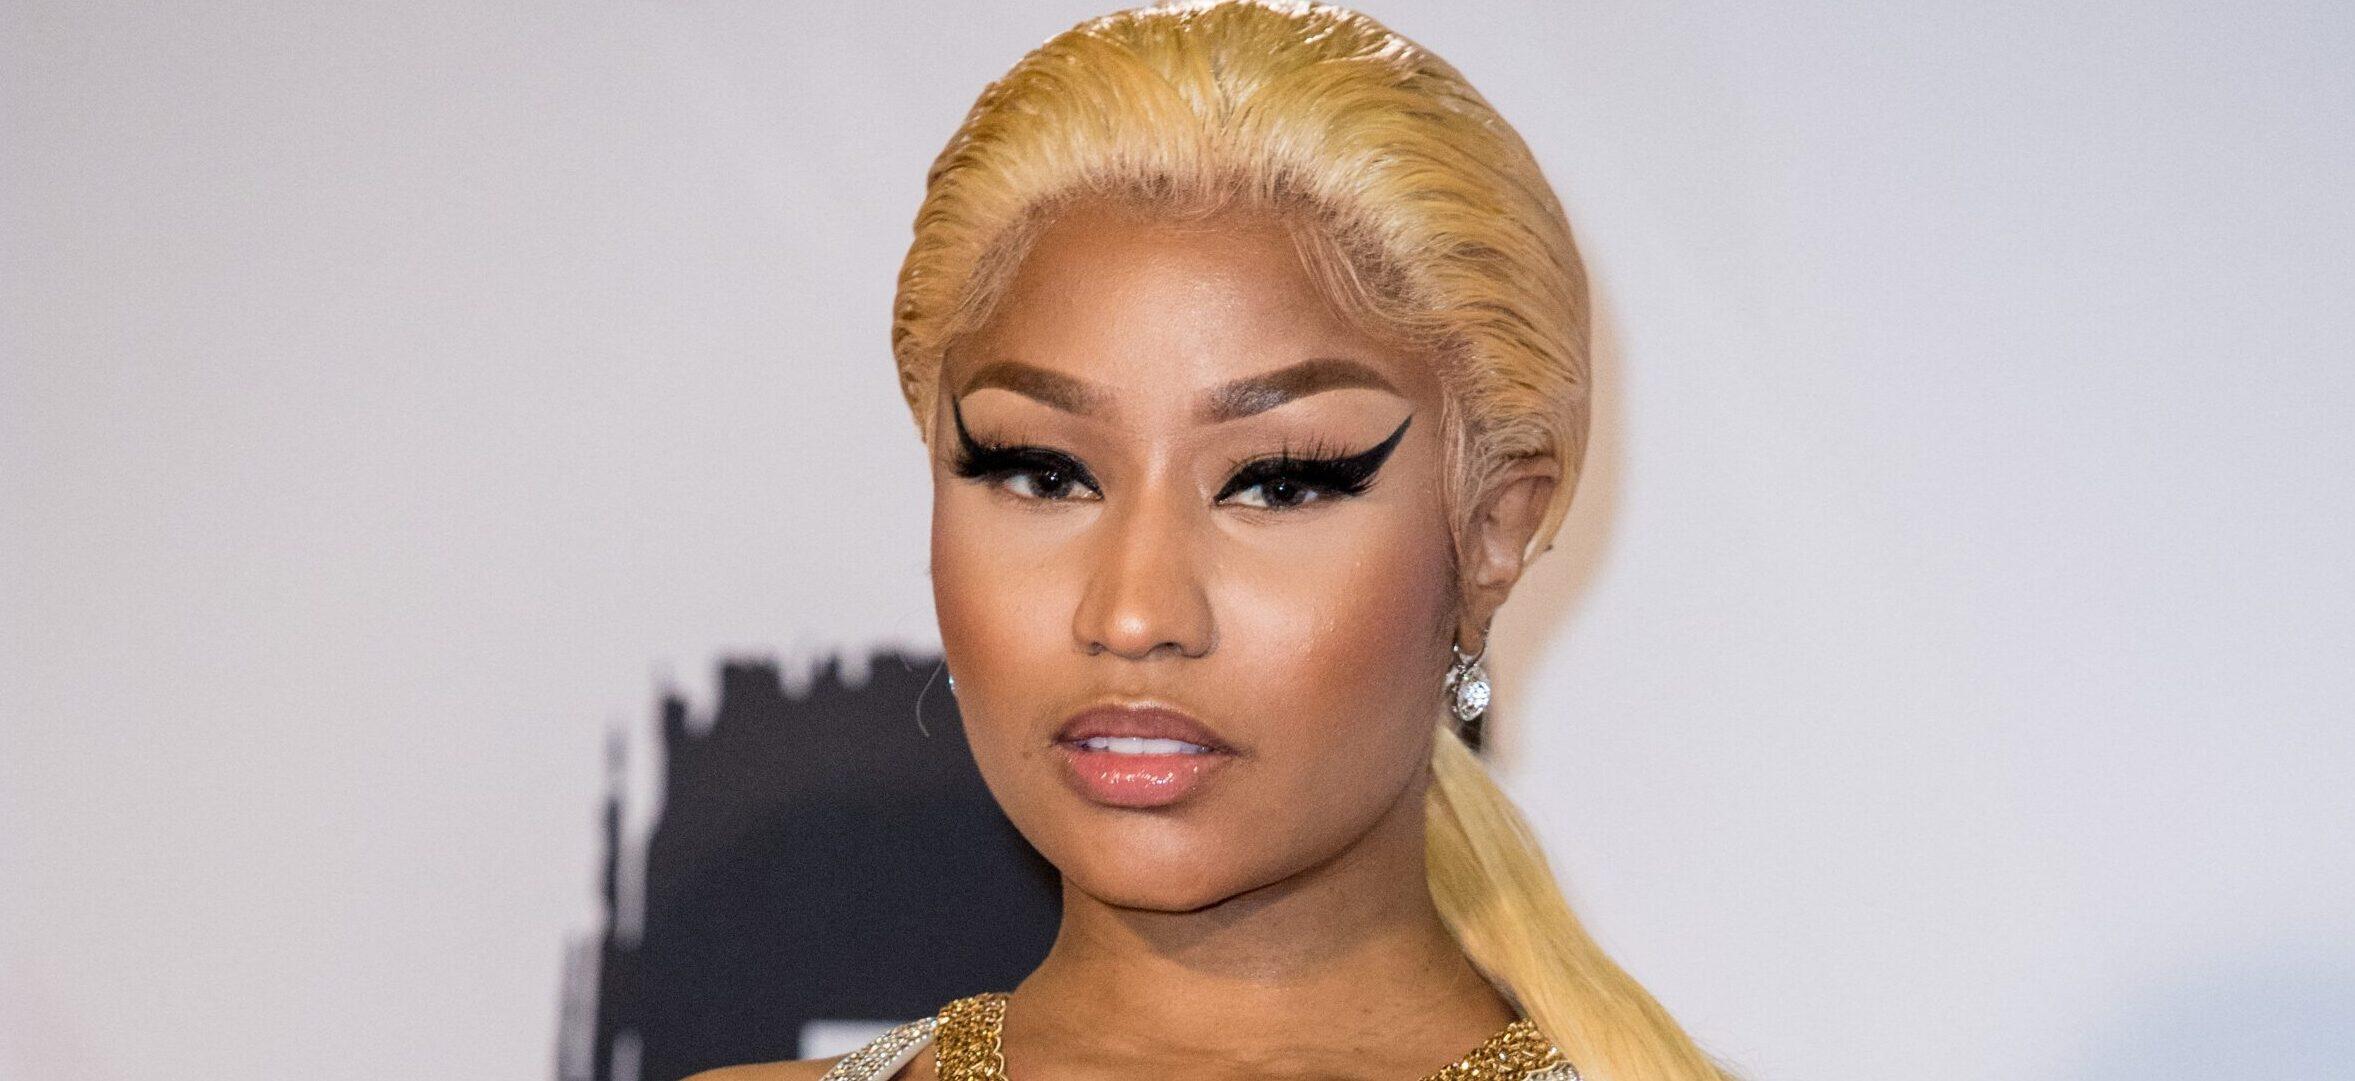 Nicki Minaj Fans Express Disappointment As Netflix’s Female Rapper Doc Excludes Their Icon